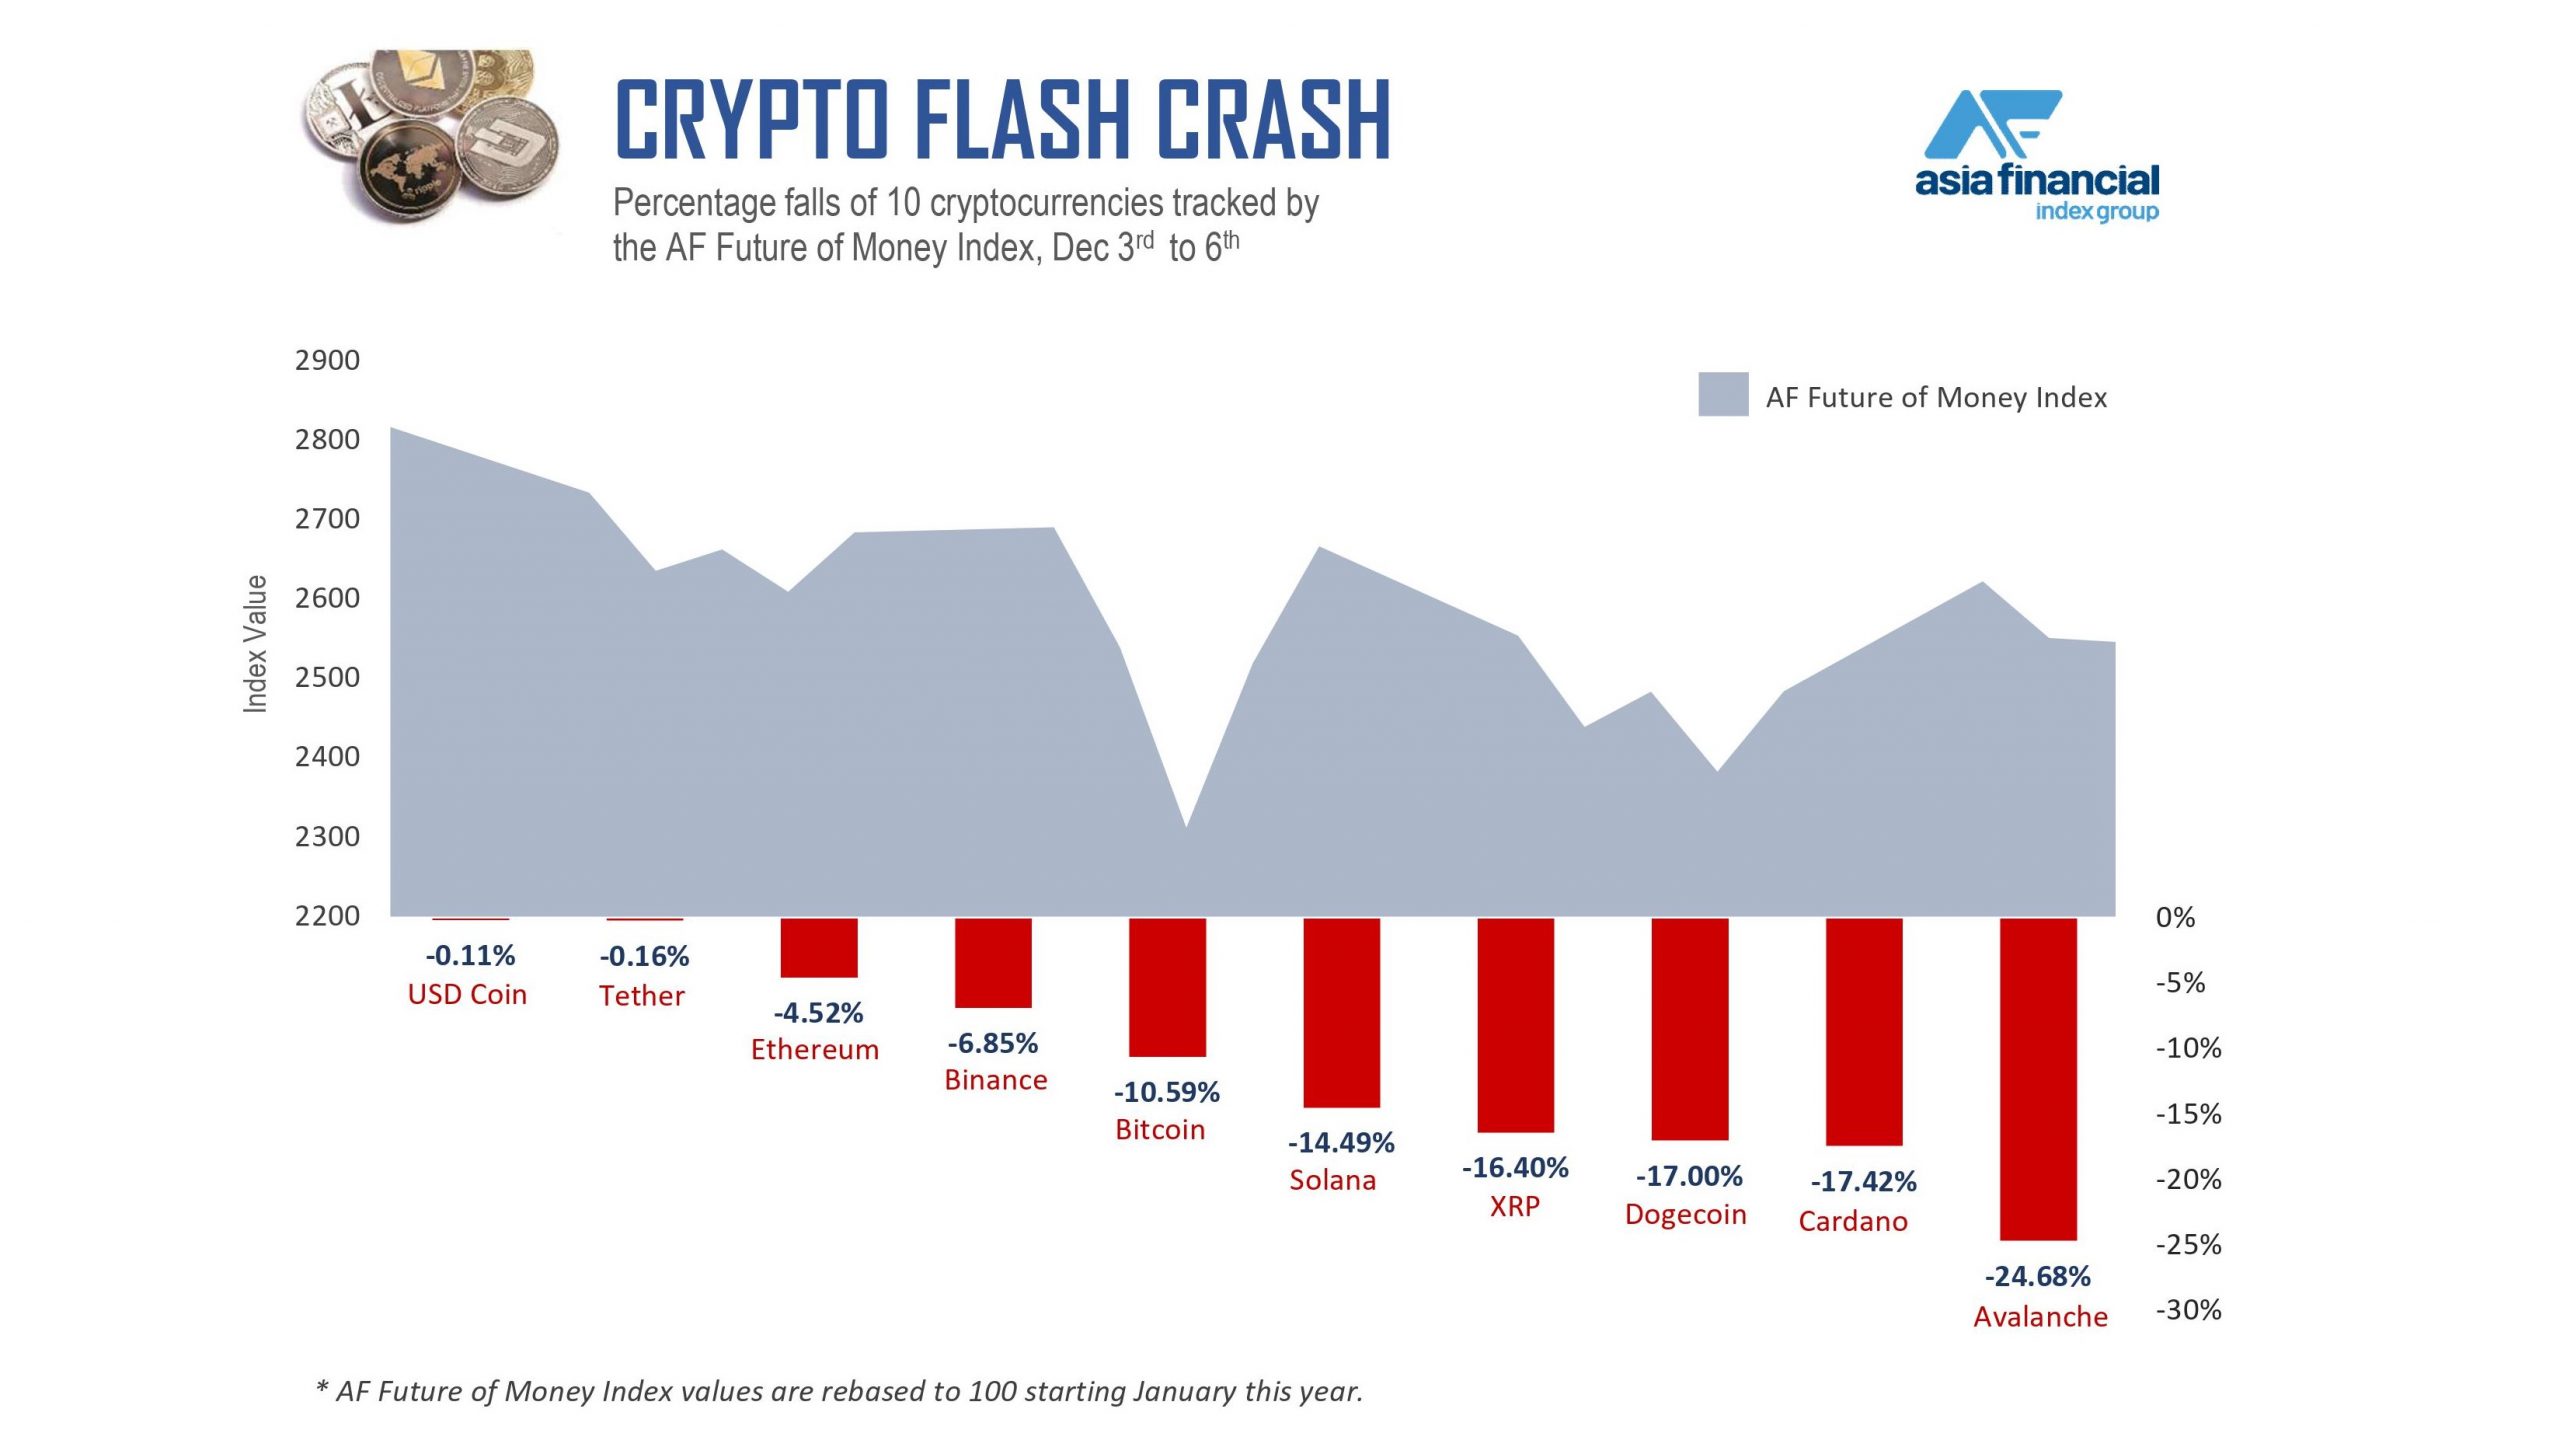 The chart shows the impact of a cryptocurrency flash crash on the Asia Financial Future of Money Index between December 3 and December 6. 